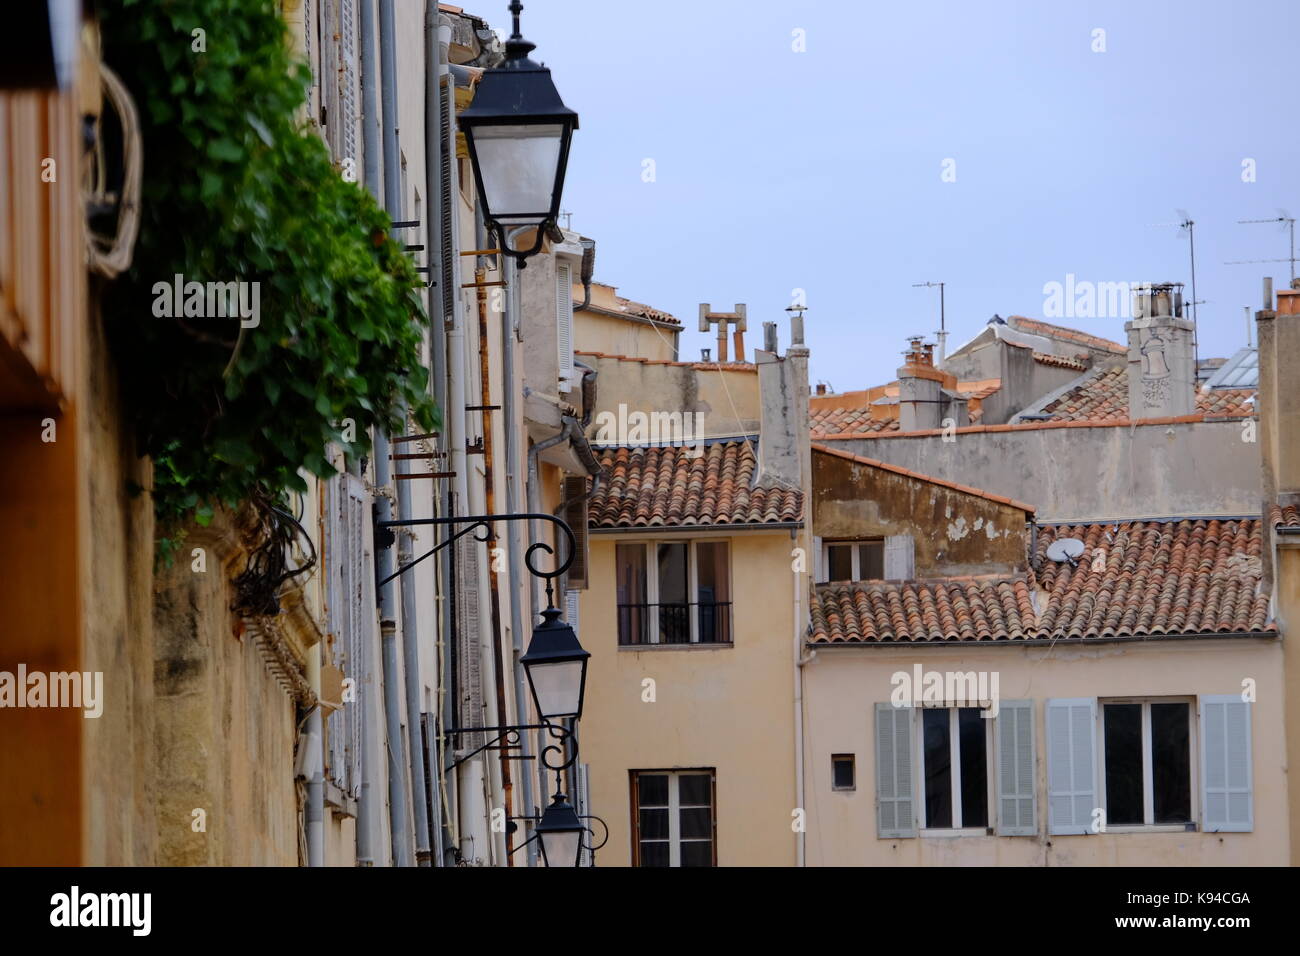 Old buildings and street lamps in Aix en Provence, South Of France Stock Photo